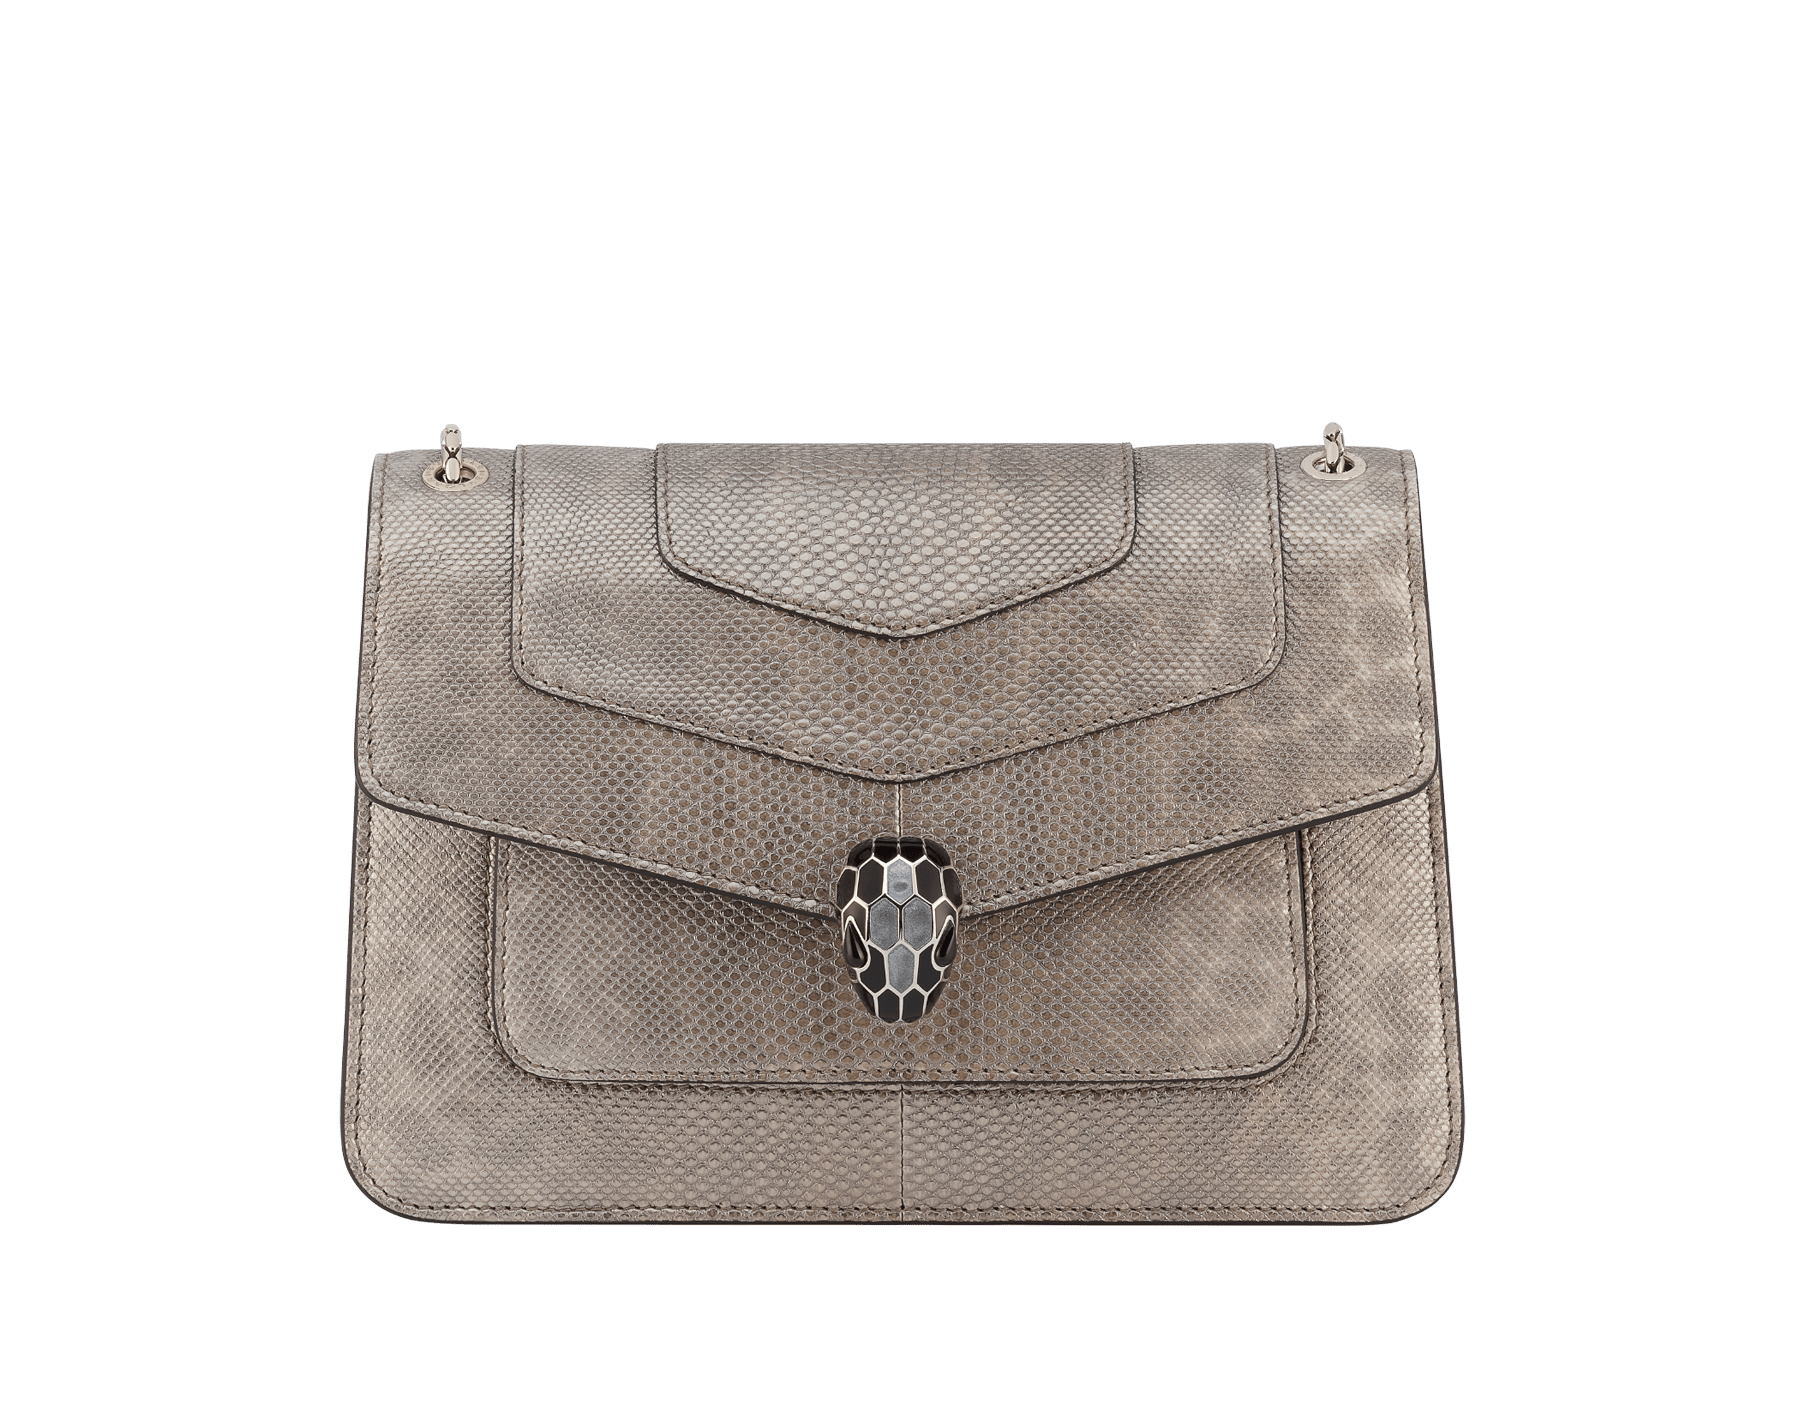 “Serpenti Forever” shoulder bag in Lavender Amethyst lilac calf leather with Reef Coral red grosgrain inner lining. Iconic snakehead closure in light gold-plated brass enhanced with black and white agate enamel and green malachite eyes. 1077-CLb image 1